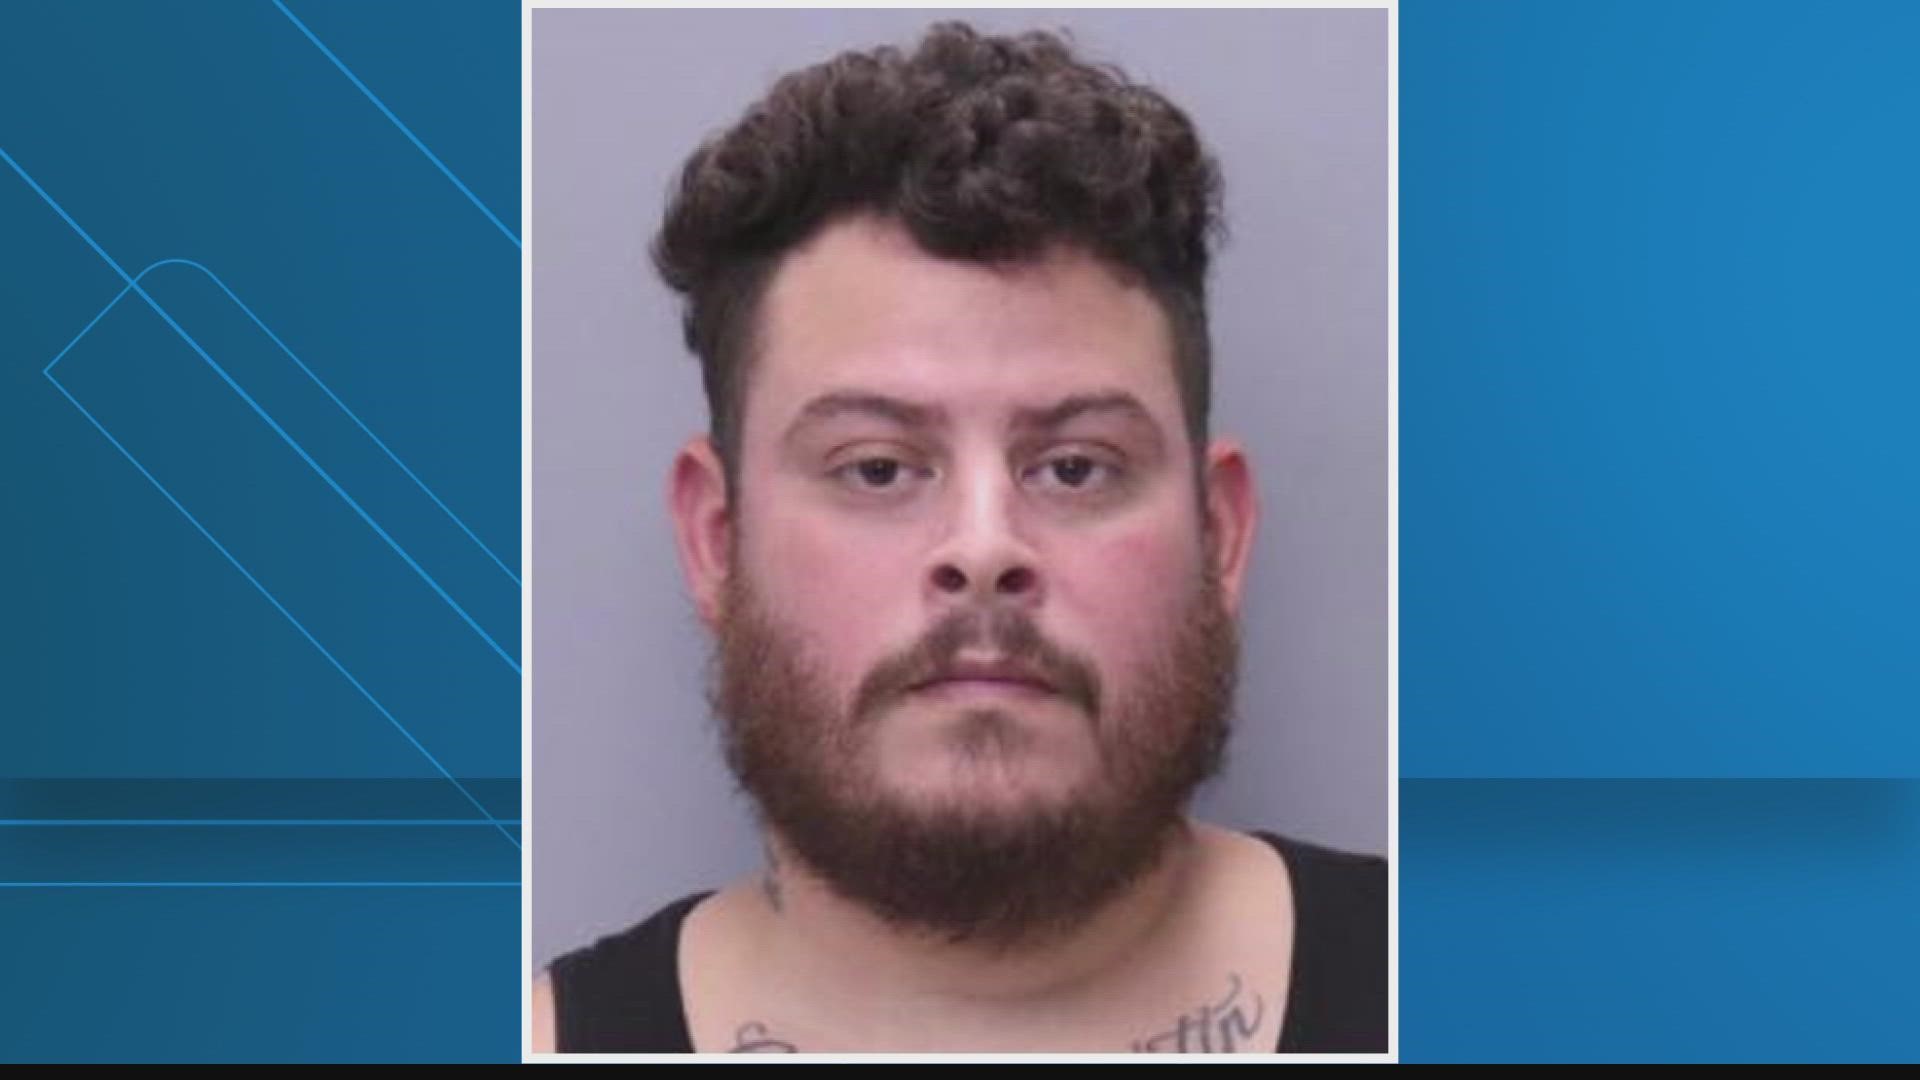 Juan Rivera-Vazquez, 31, has been arrested for aggravated child abuse, his 3-year-old child remains in the hospital with life threatening injuries.